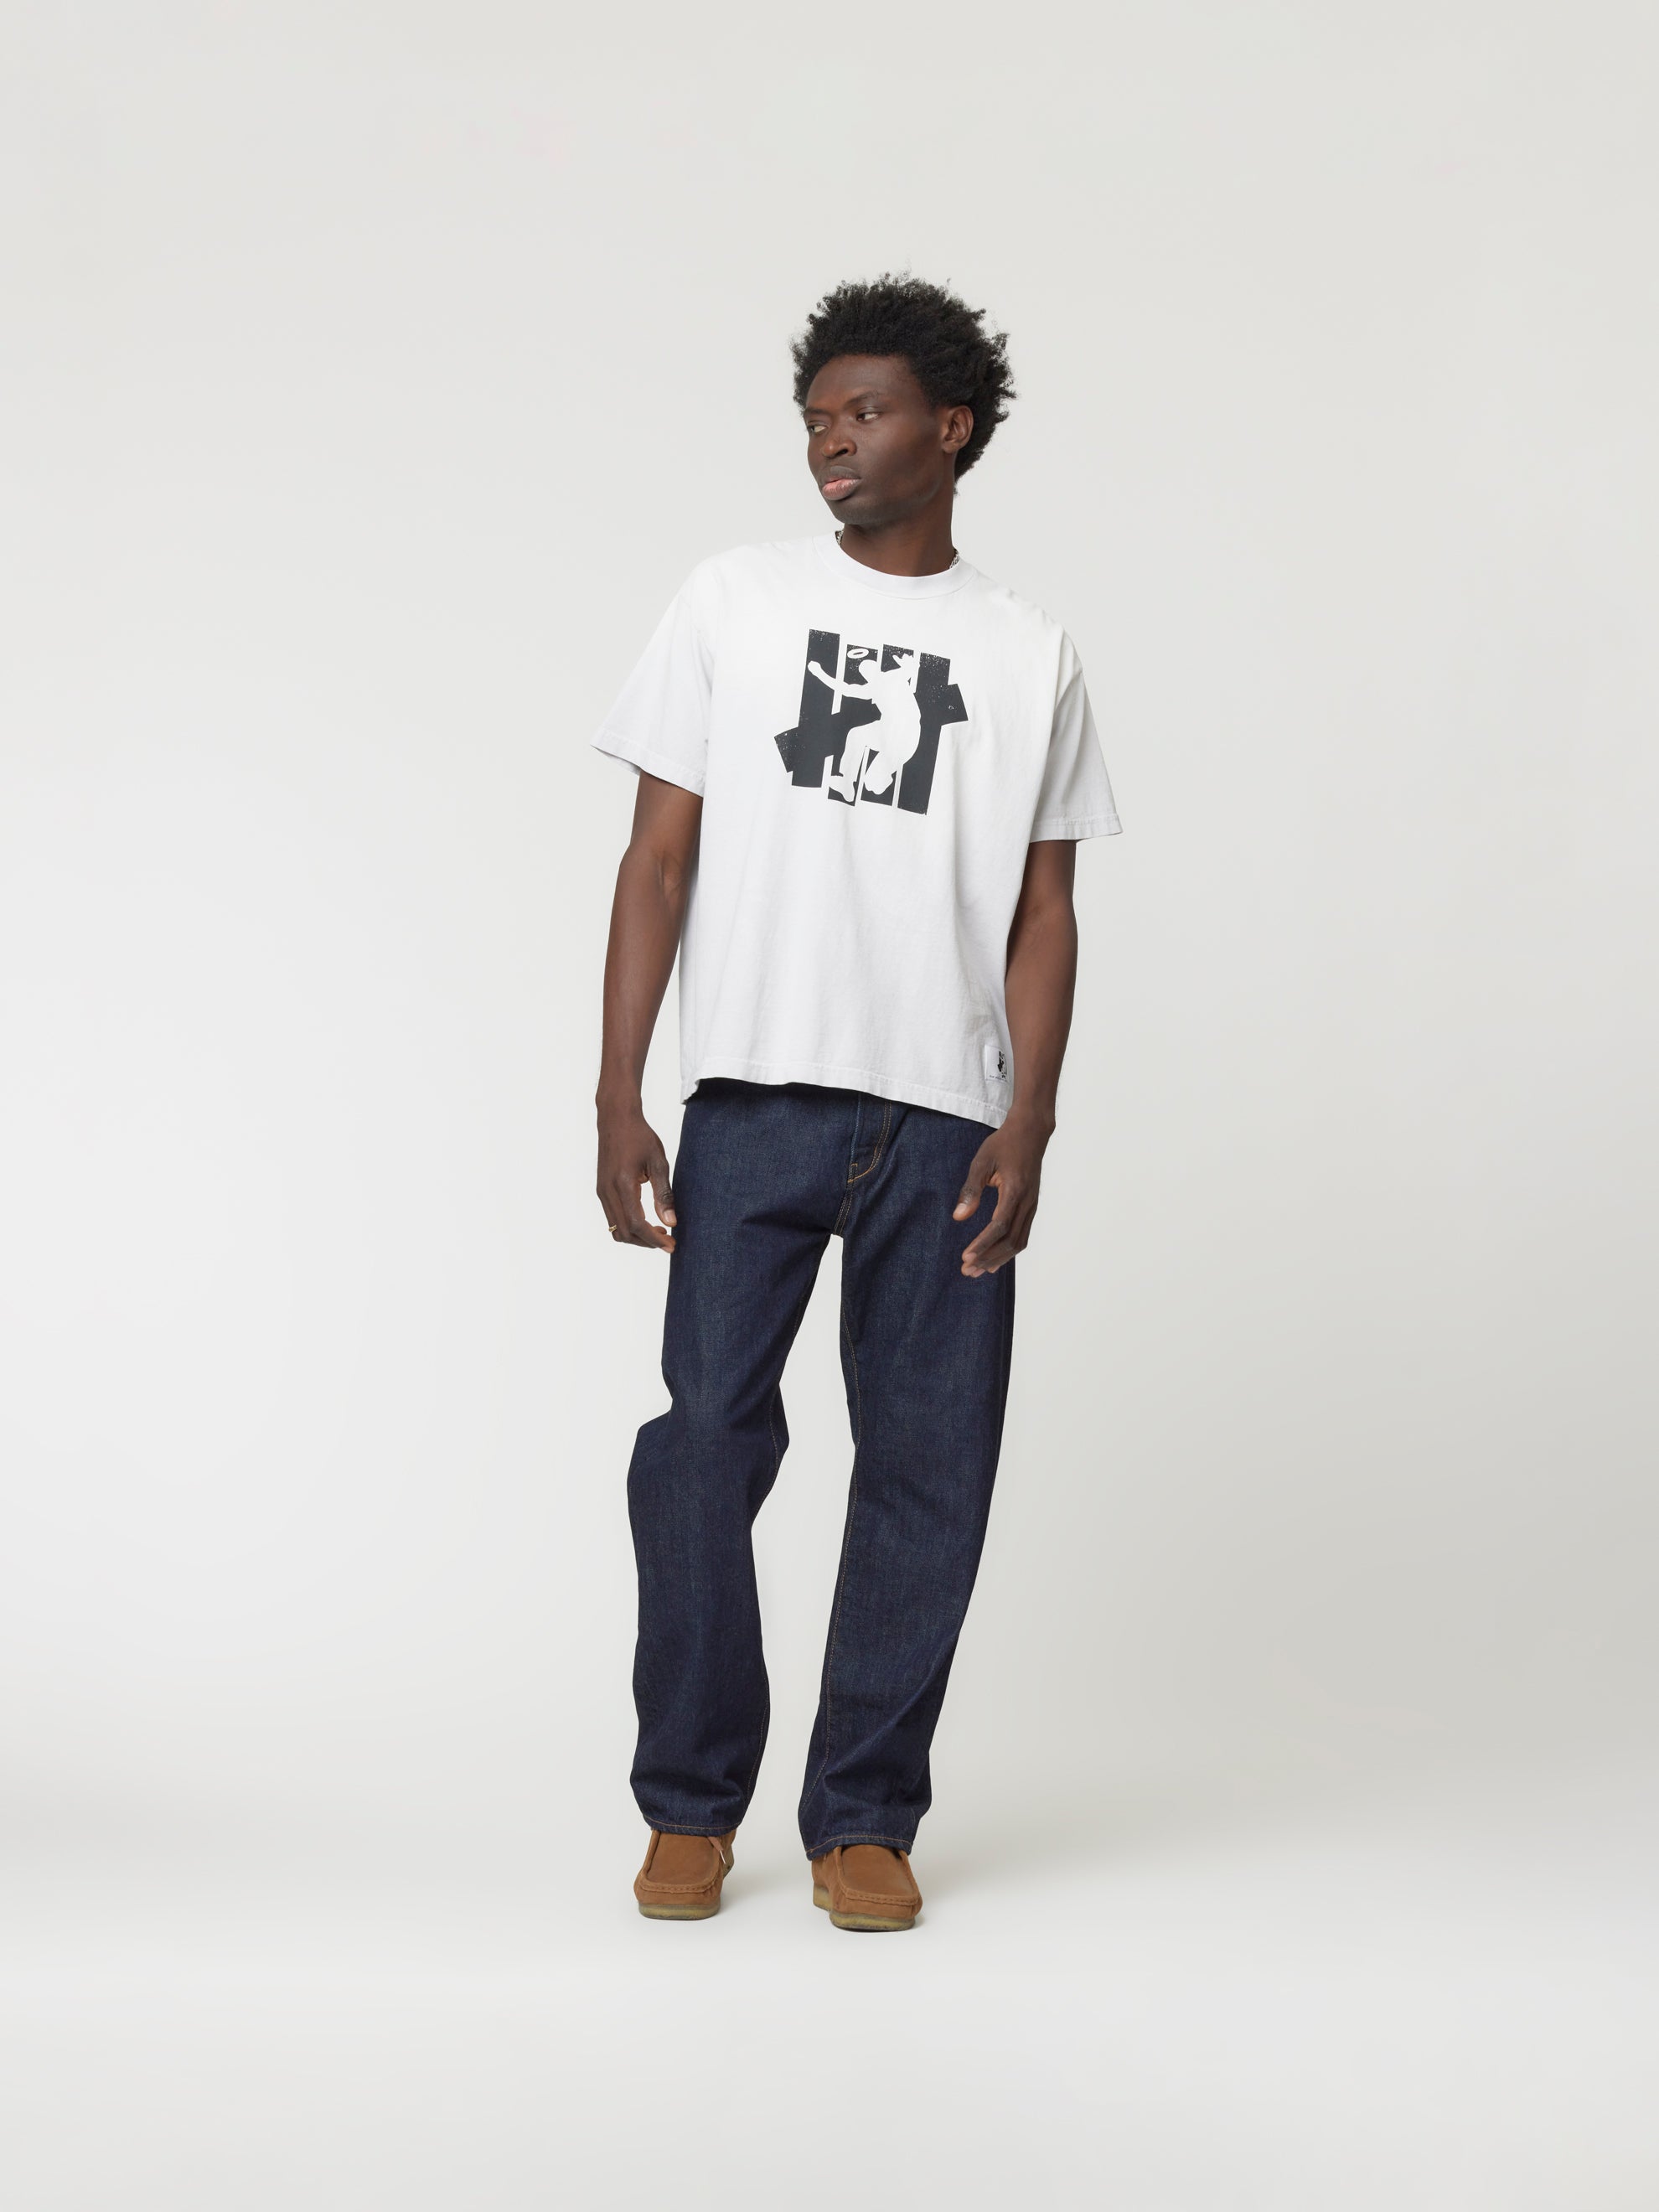 UNDEFEATED x UNION S/S Tee (Faded Lt.Grey)